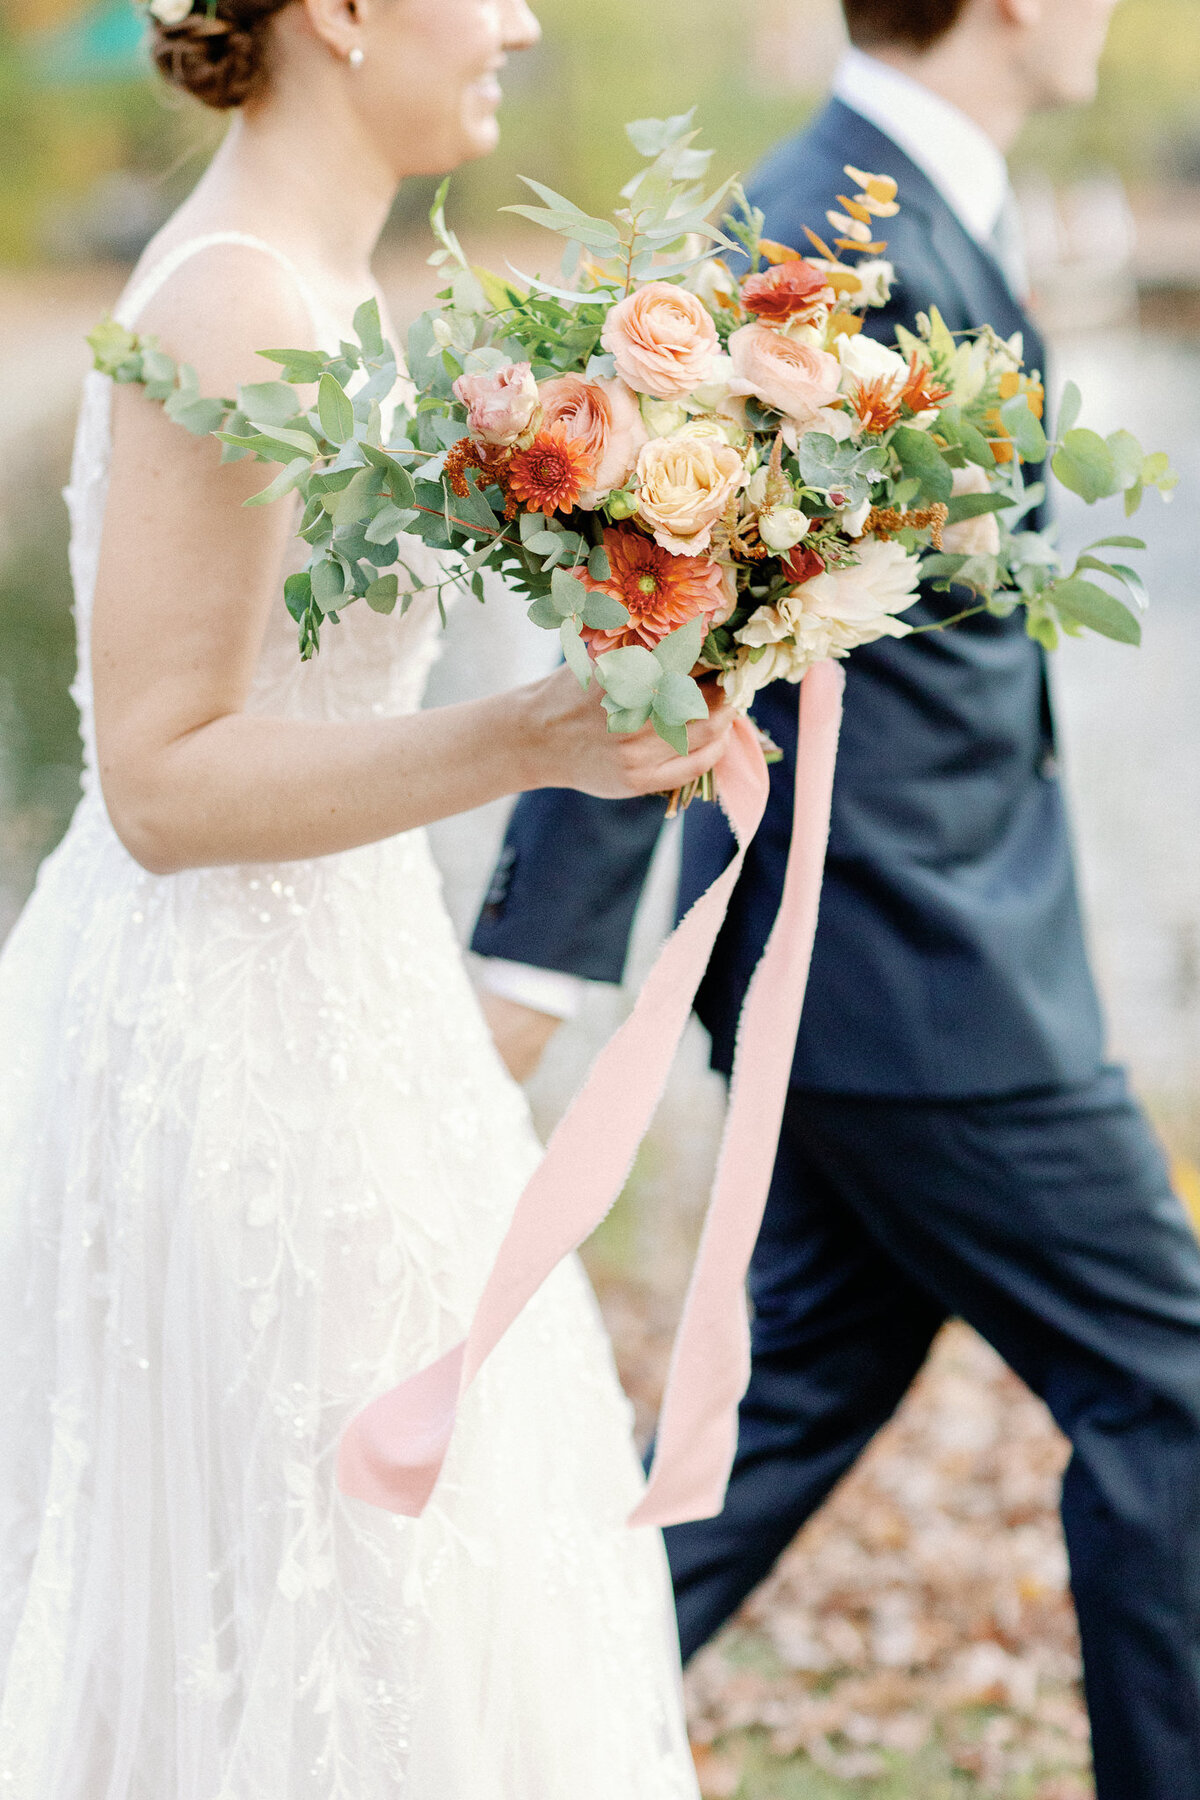 A candid capture of a bride walking with groom. The image is focused on the bride's bouquet